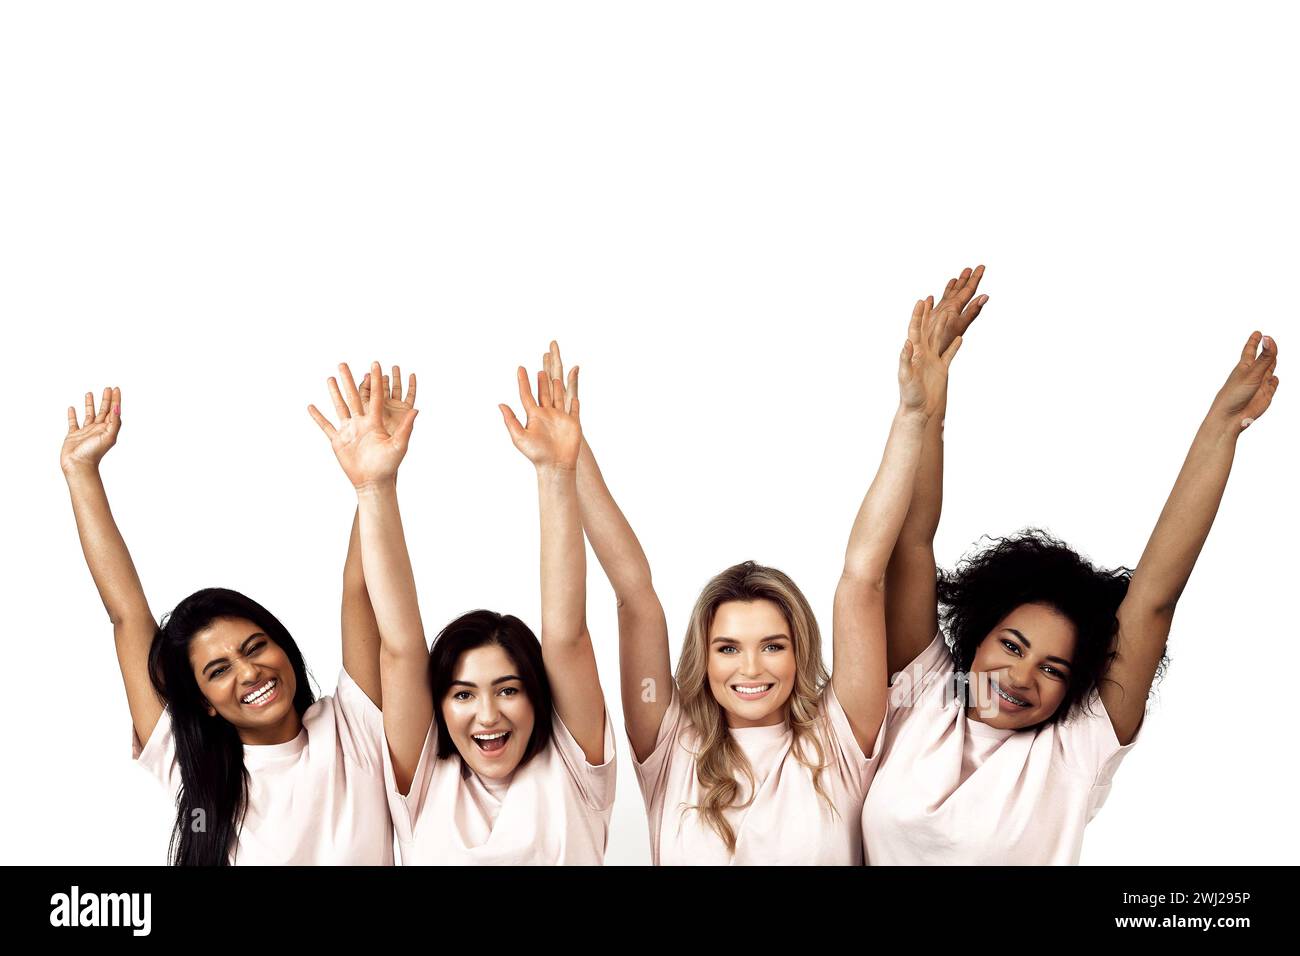 Multicultural diversity and friendship. Multi-ethnic group of happy women raising hands against white background Stock Photo